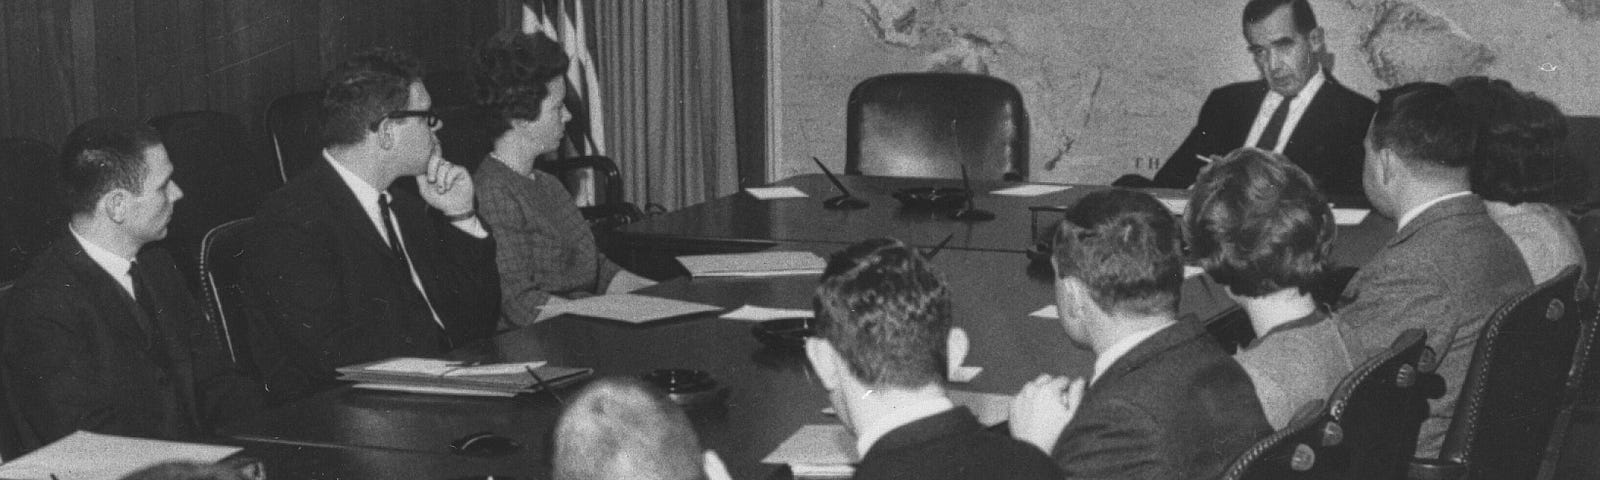 Black and white image of Edward R Murrow meeting with new foreign service officers around a conference table